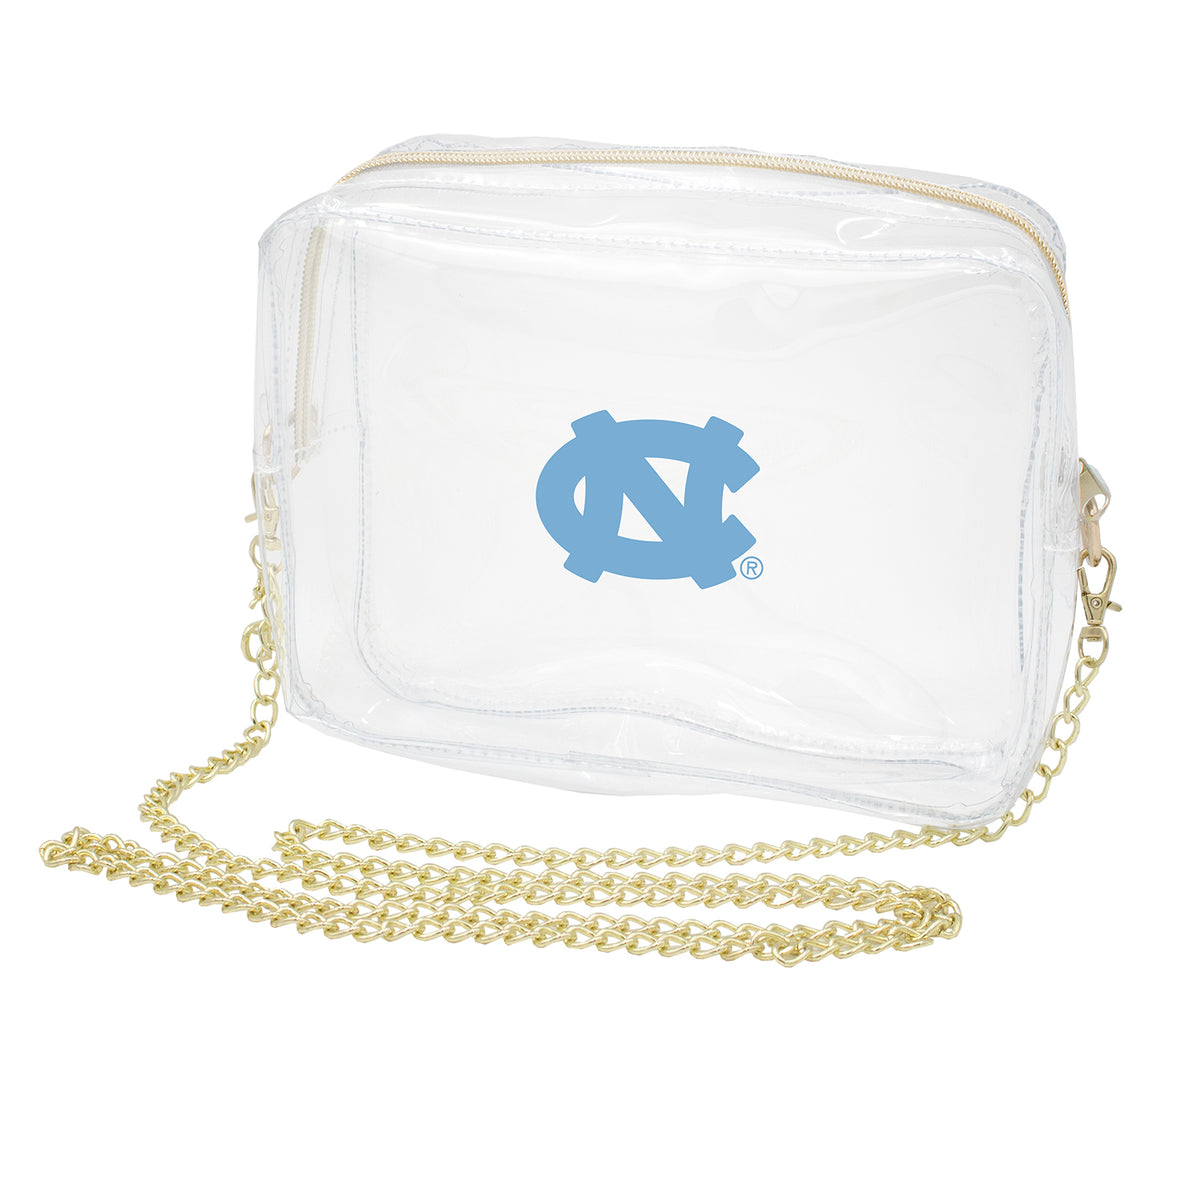 Clear UNC Bag with Gold Chain